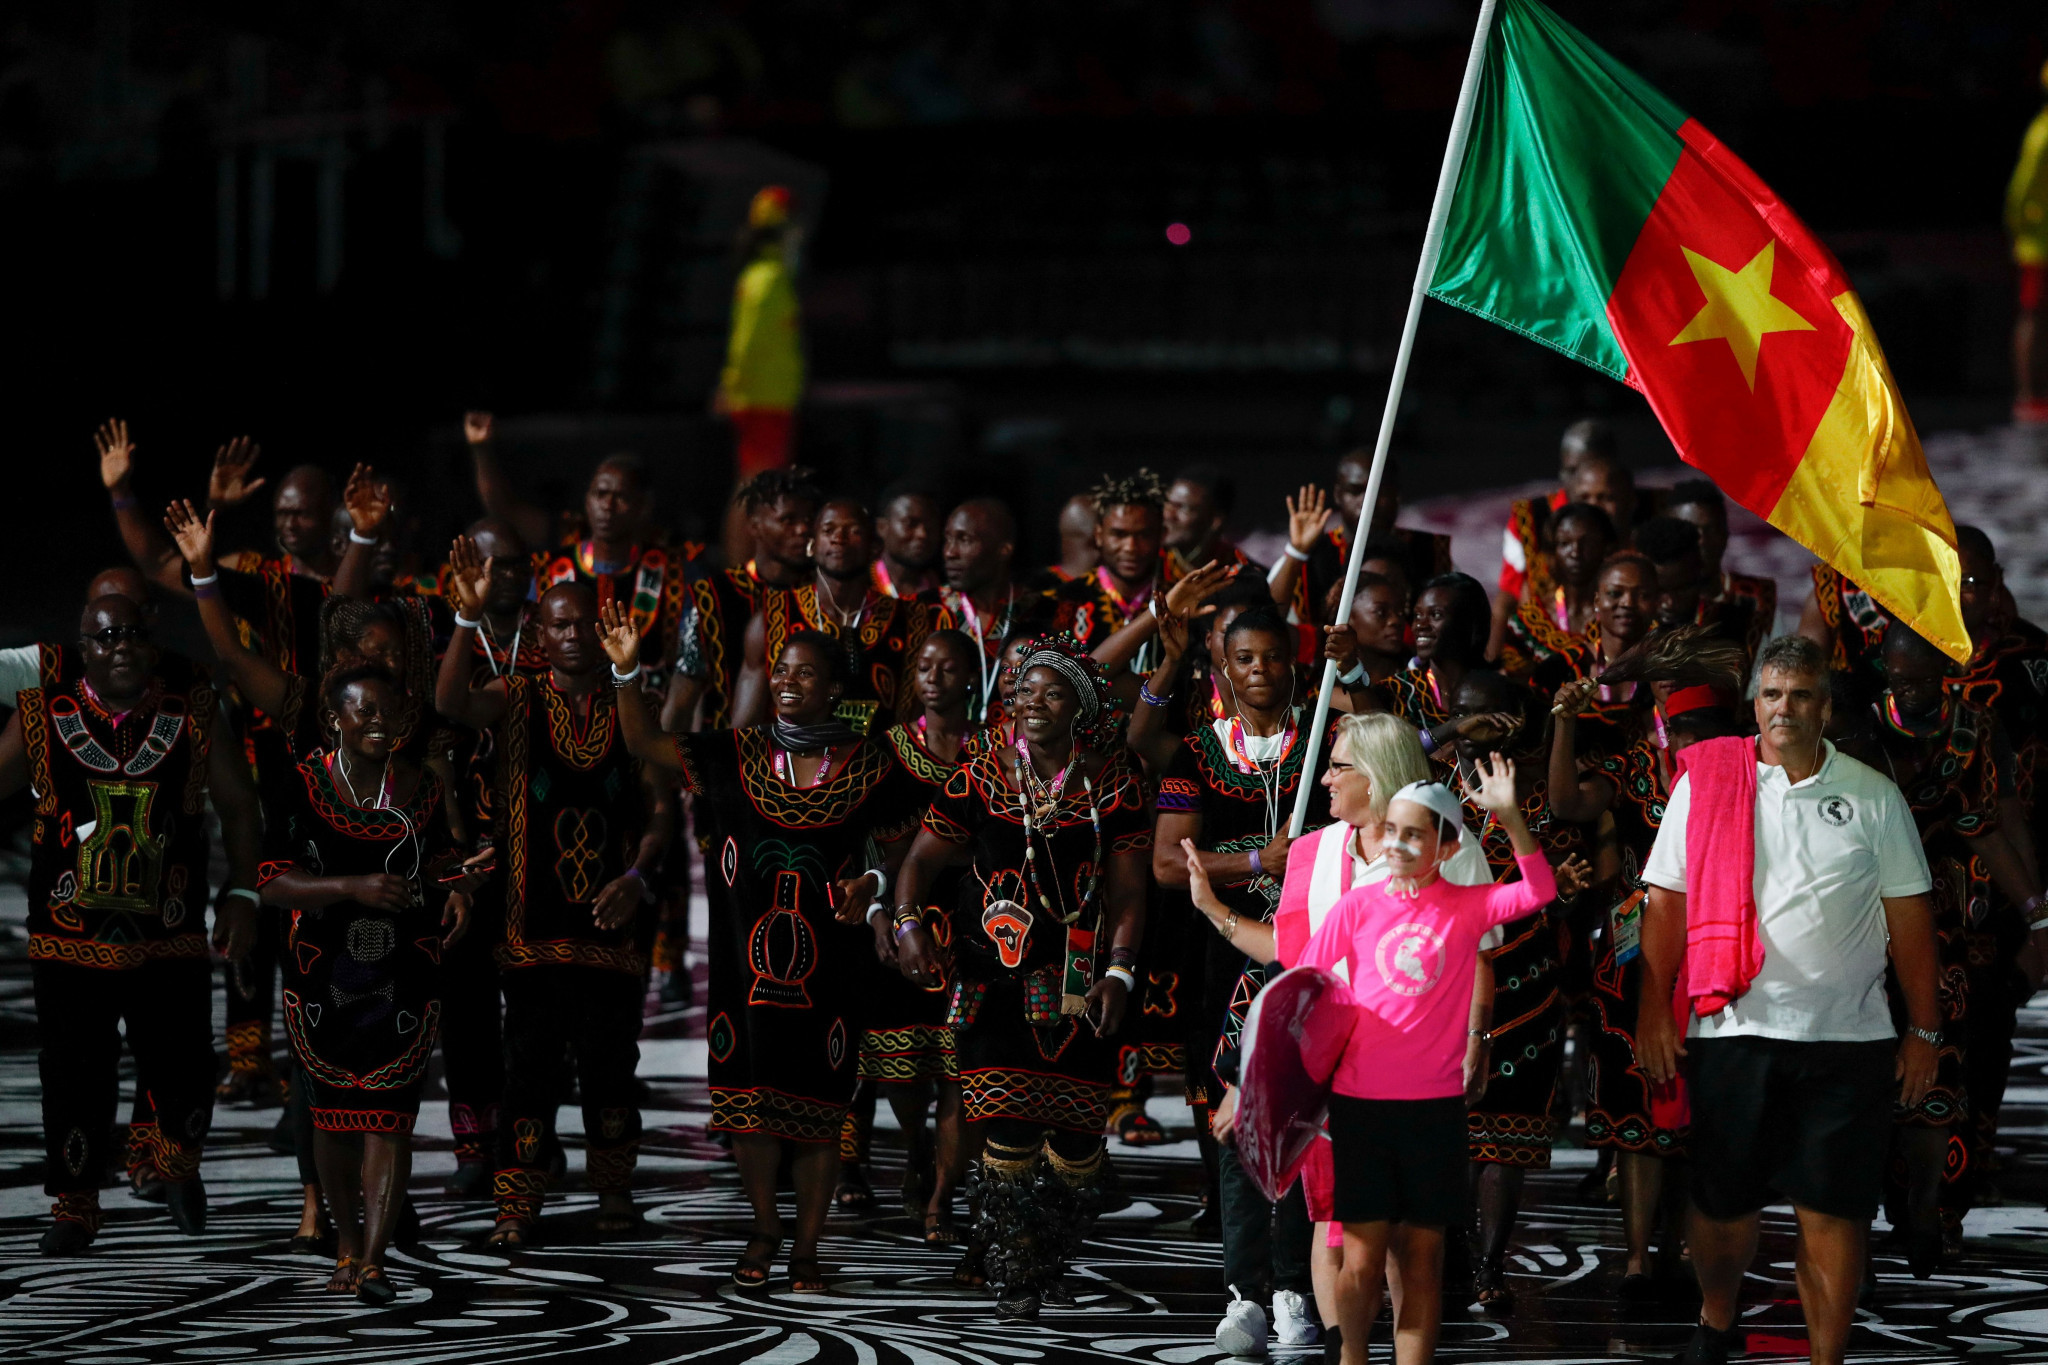 Cameroon has embraced the Commonwealth Games since joining the Movement in 1995 ©Getty Images